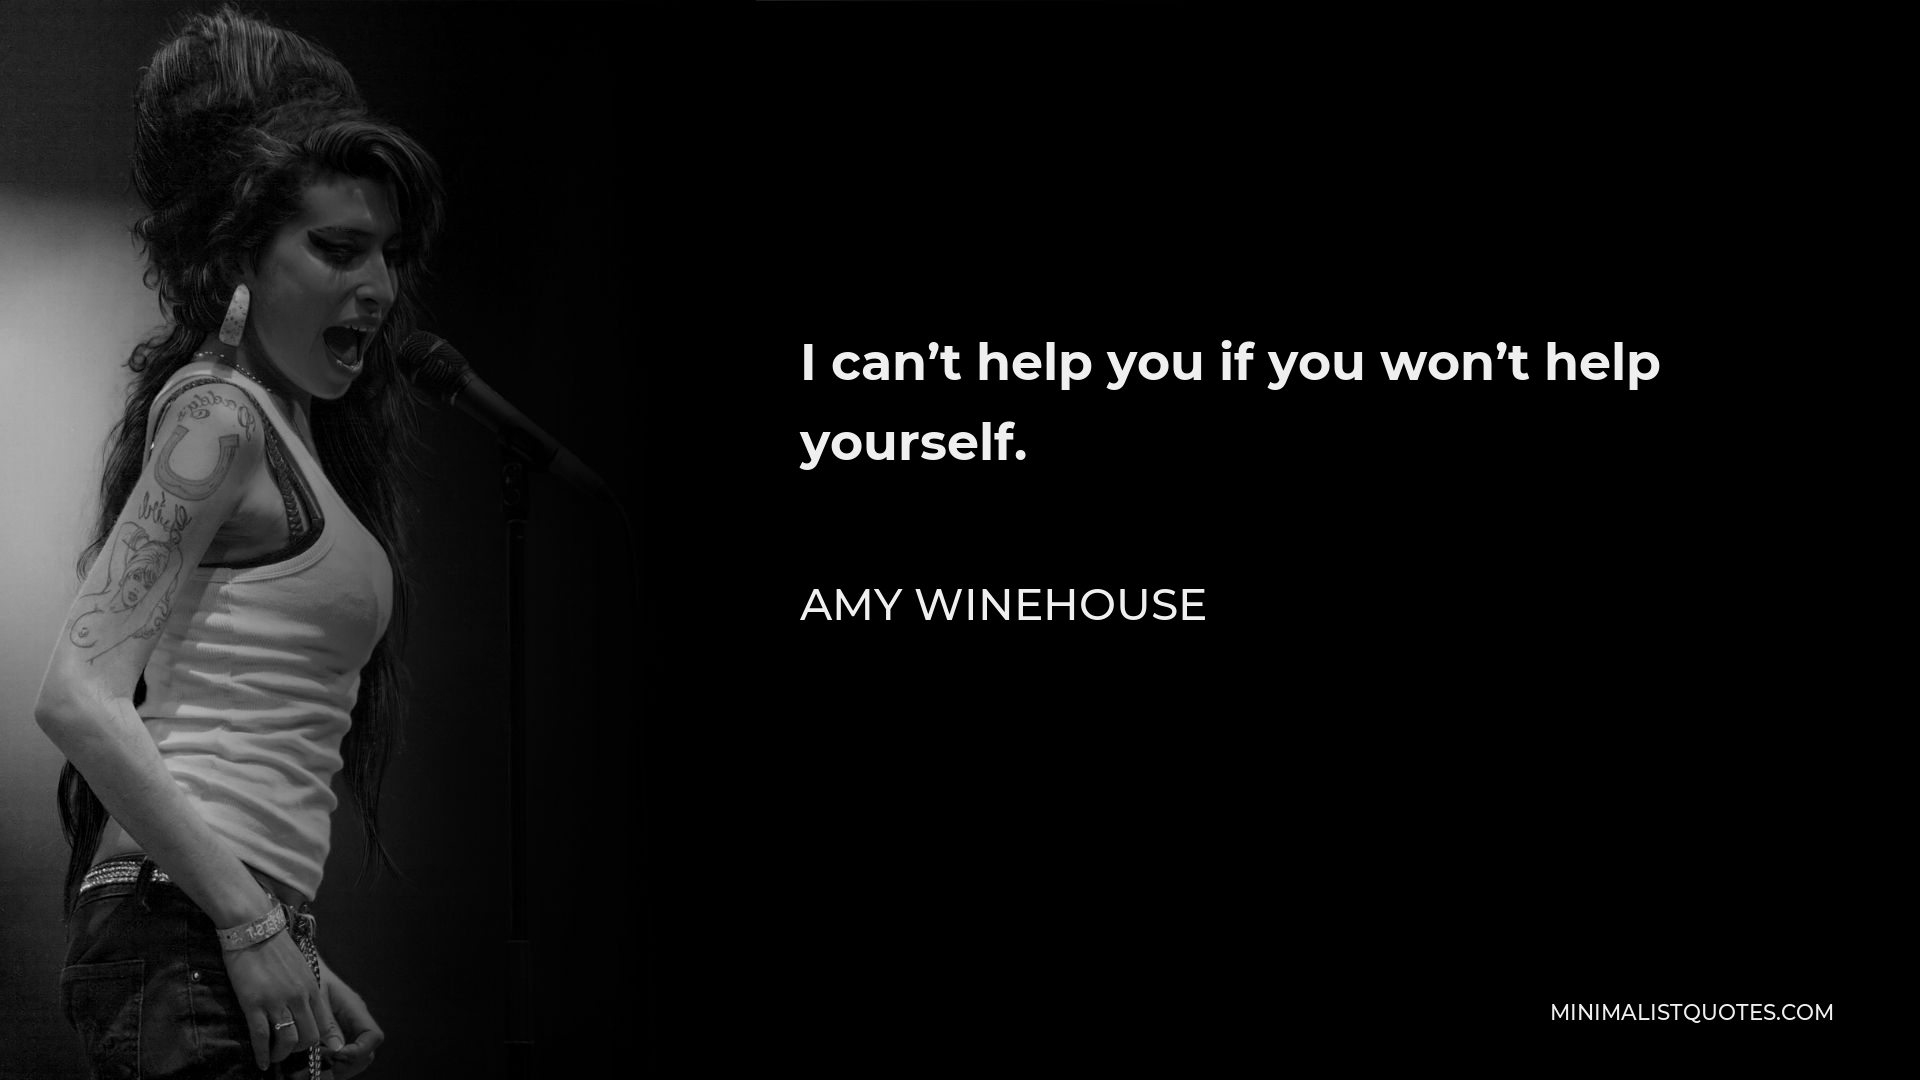 Amy Winehouse Quote - I can’t help you if you won’t help yourself.